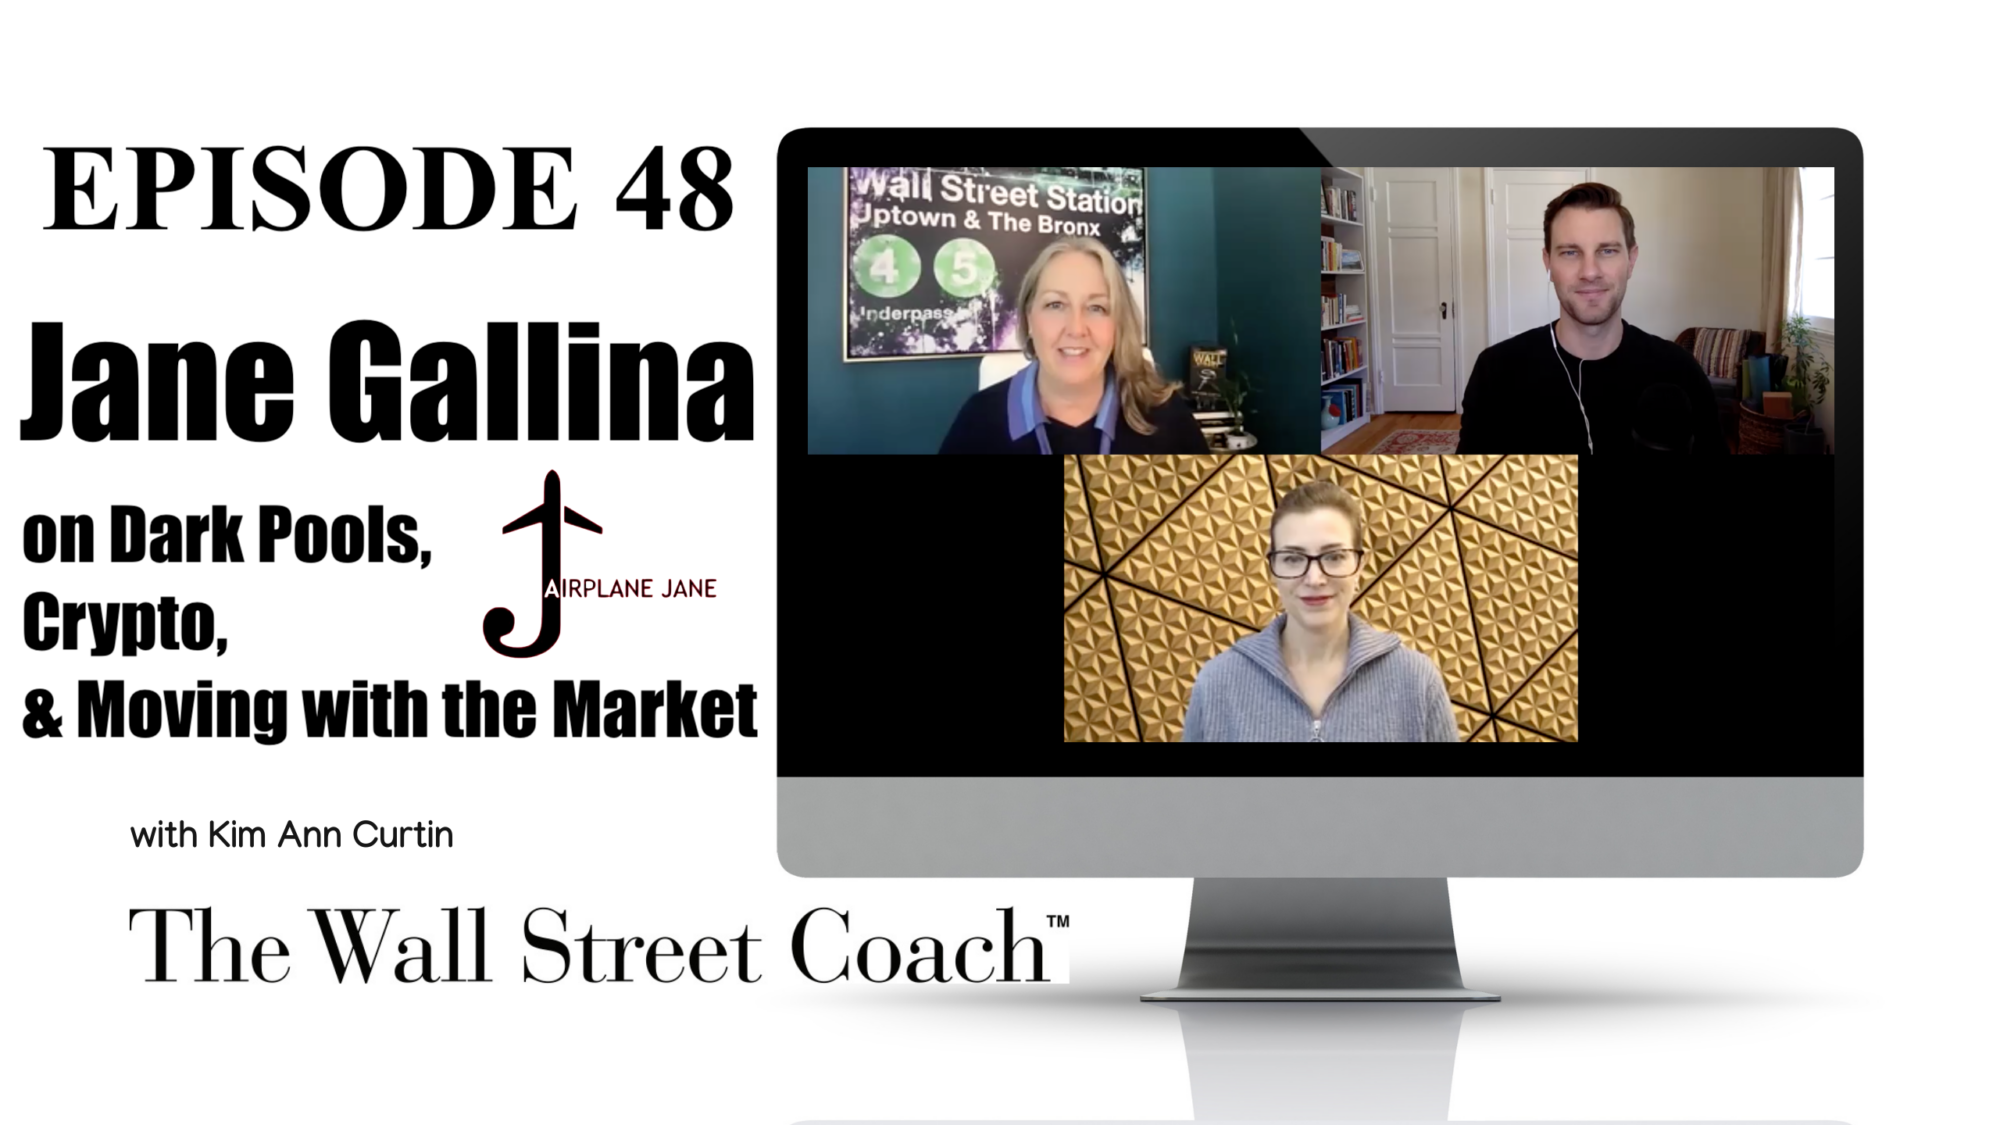 Episode 48: Jane Gallina on Dark Pools, Crypto, and Moving with the Market